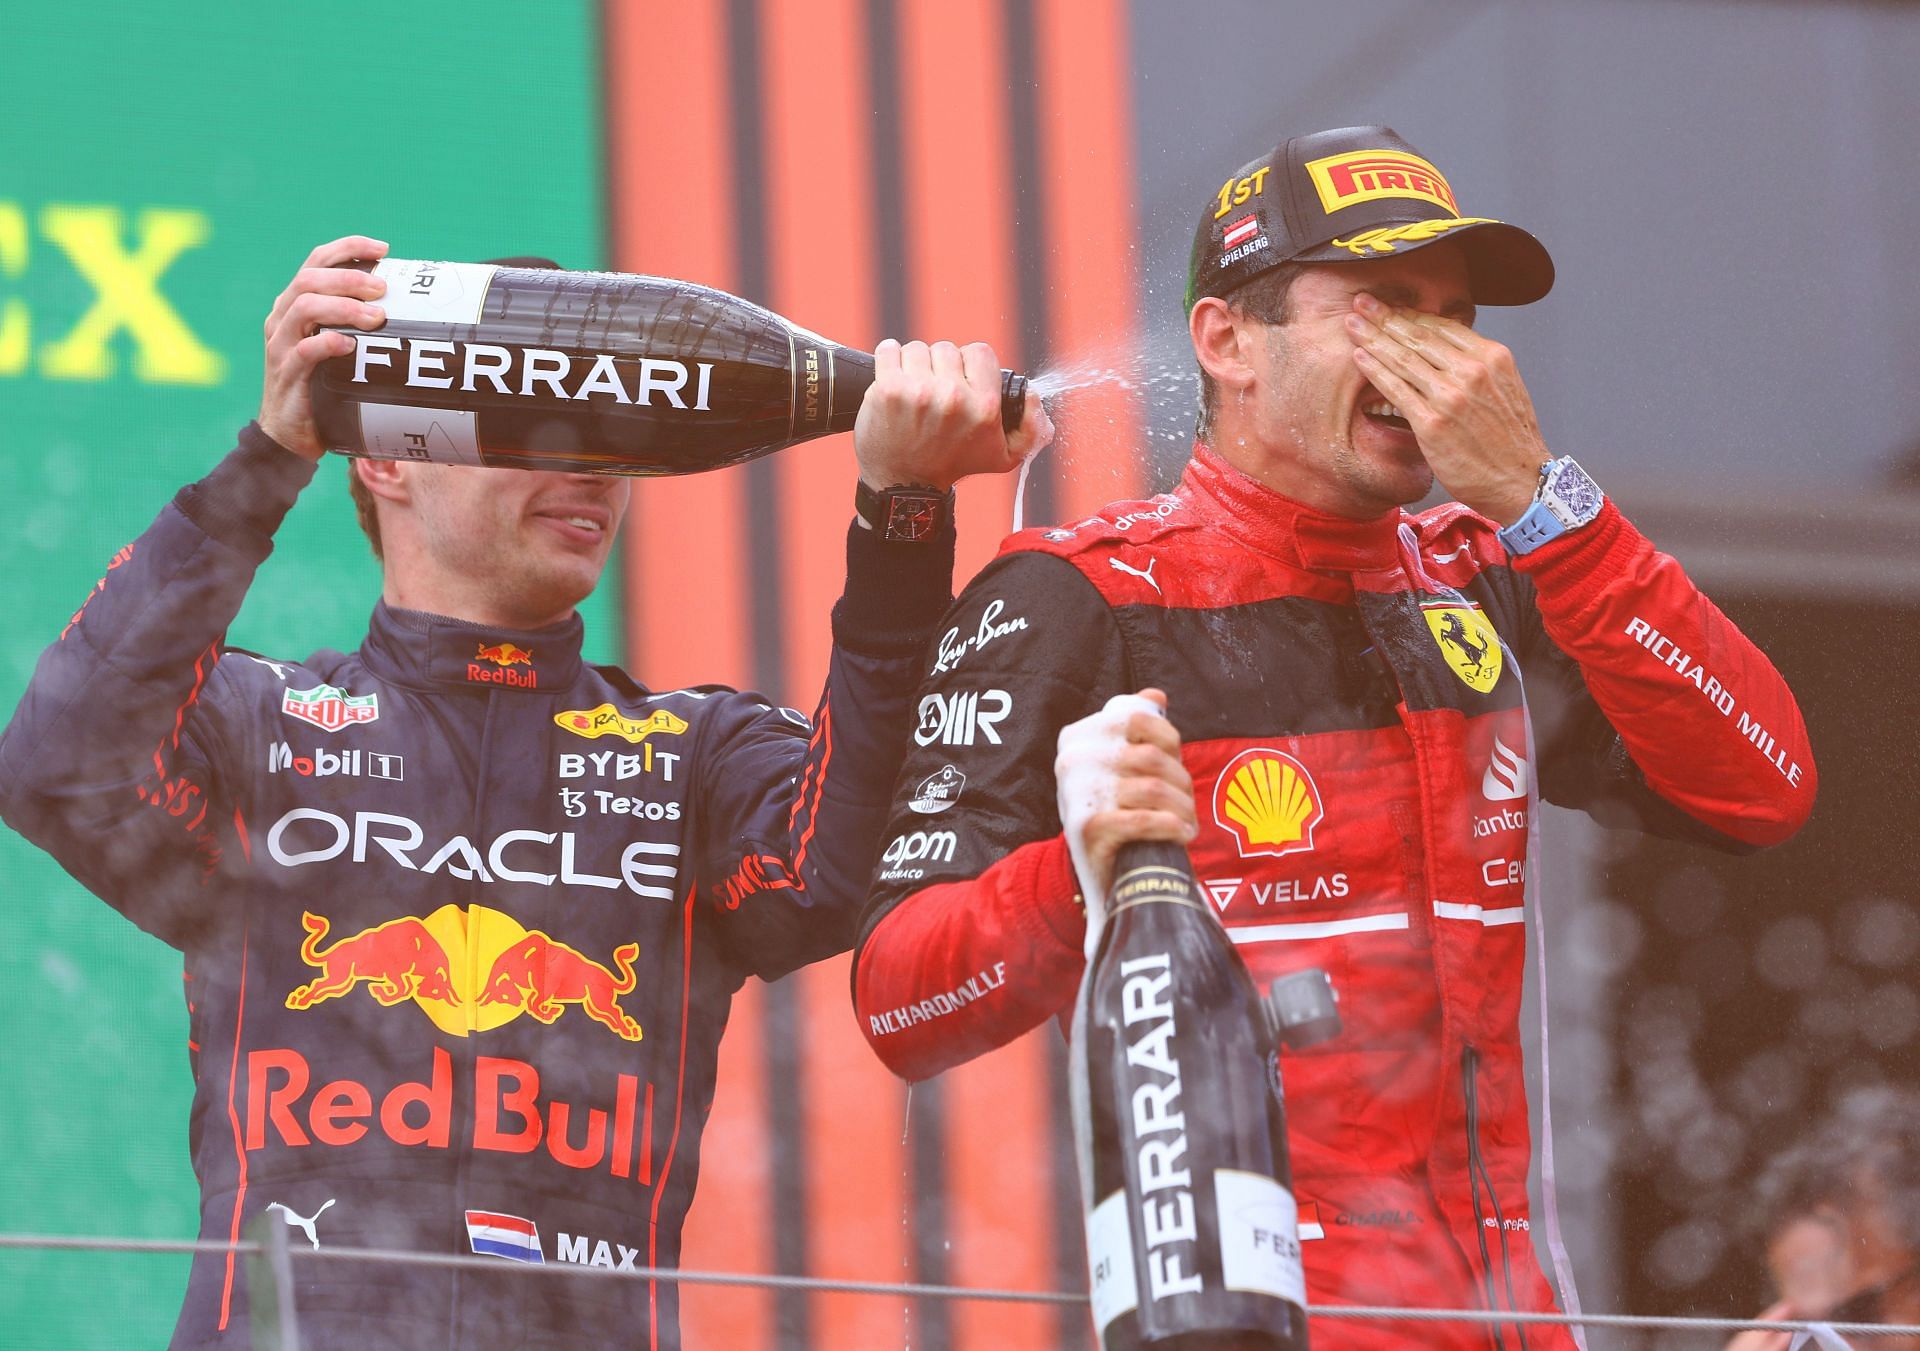 Charles Leclerc (right) and Max Verstappen (left) celebrate on the podium during the F1 Grand Prix of Austria at Red Bull Ring on July 10, 2022, in Spielberg, Austria (Photo by Clive Rose/Getty Images)